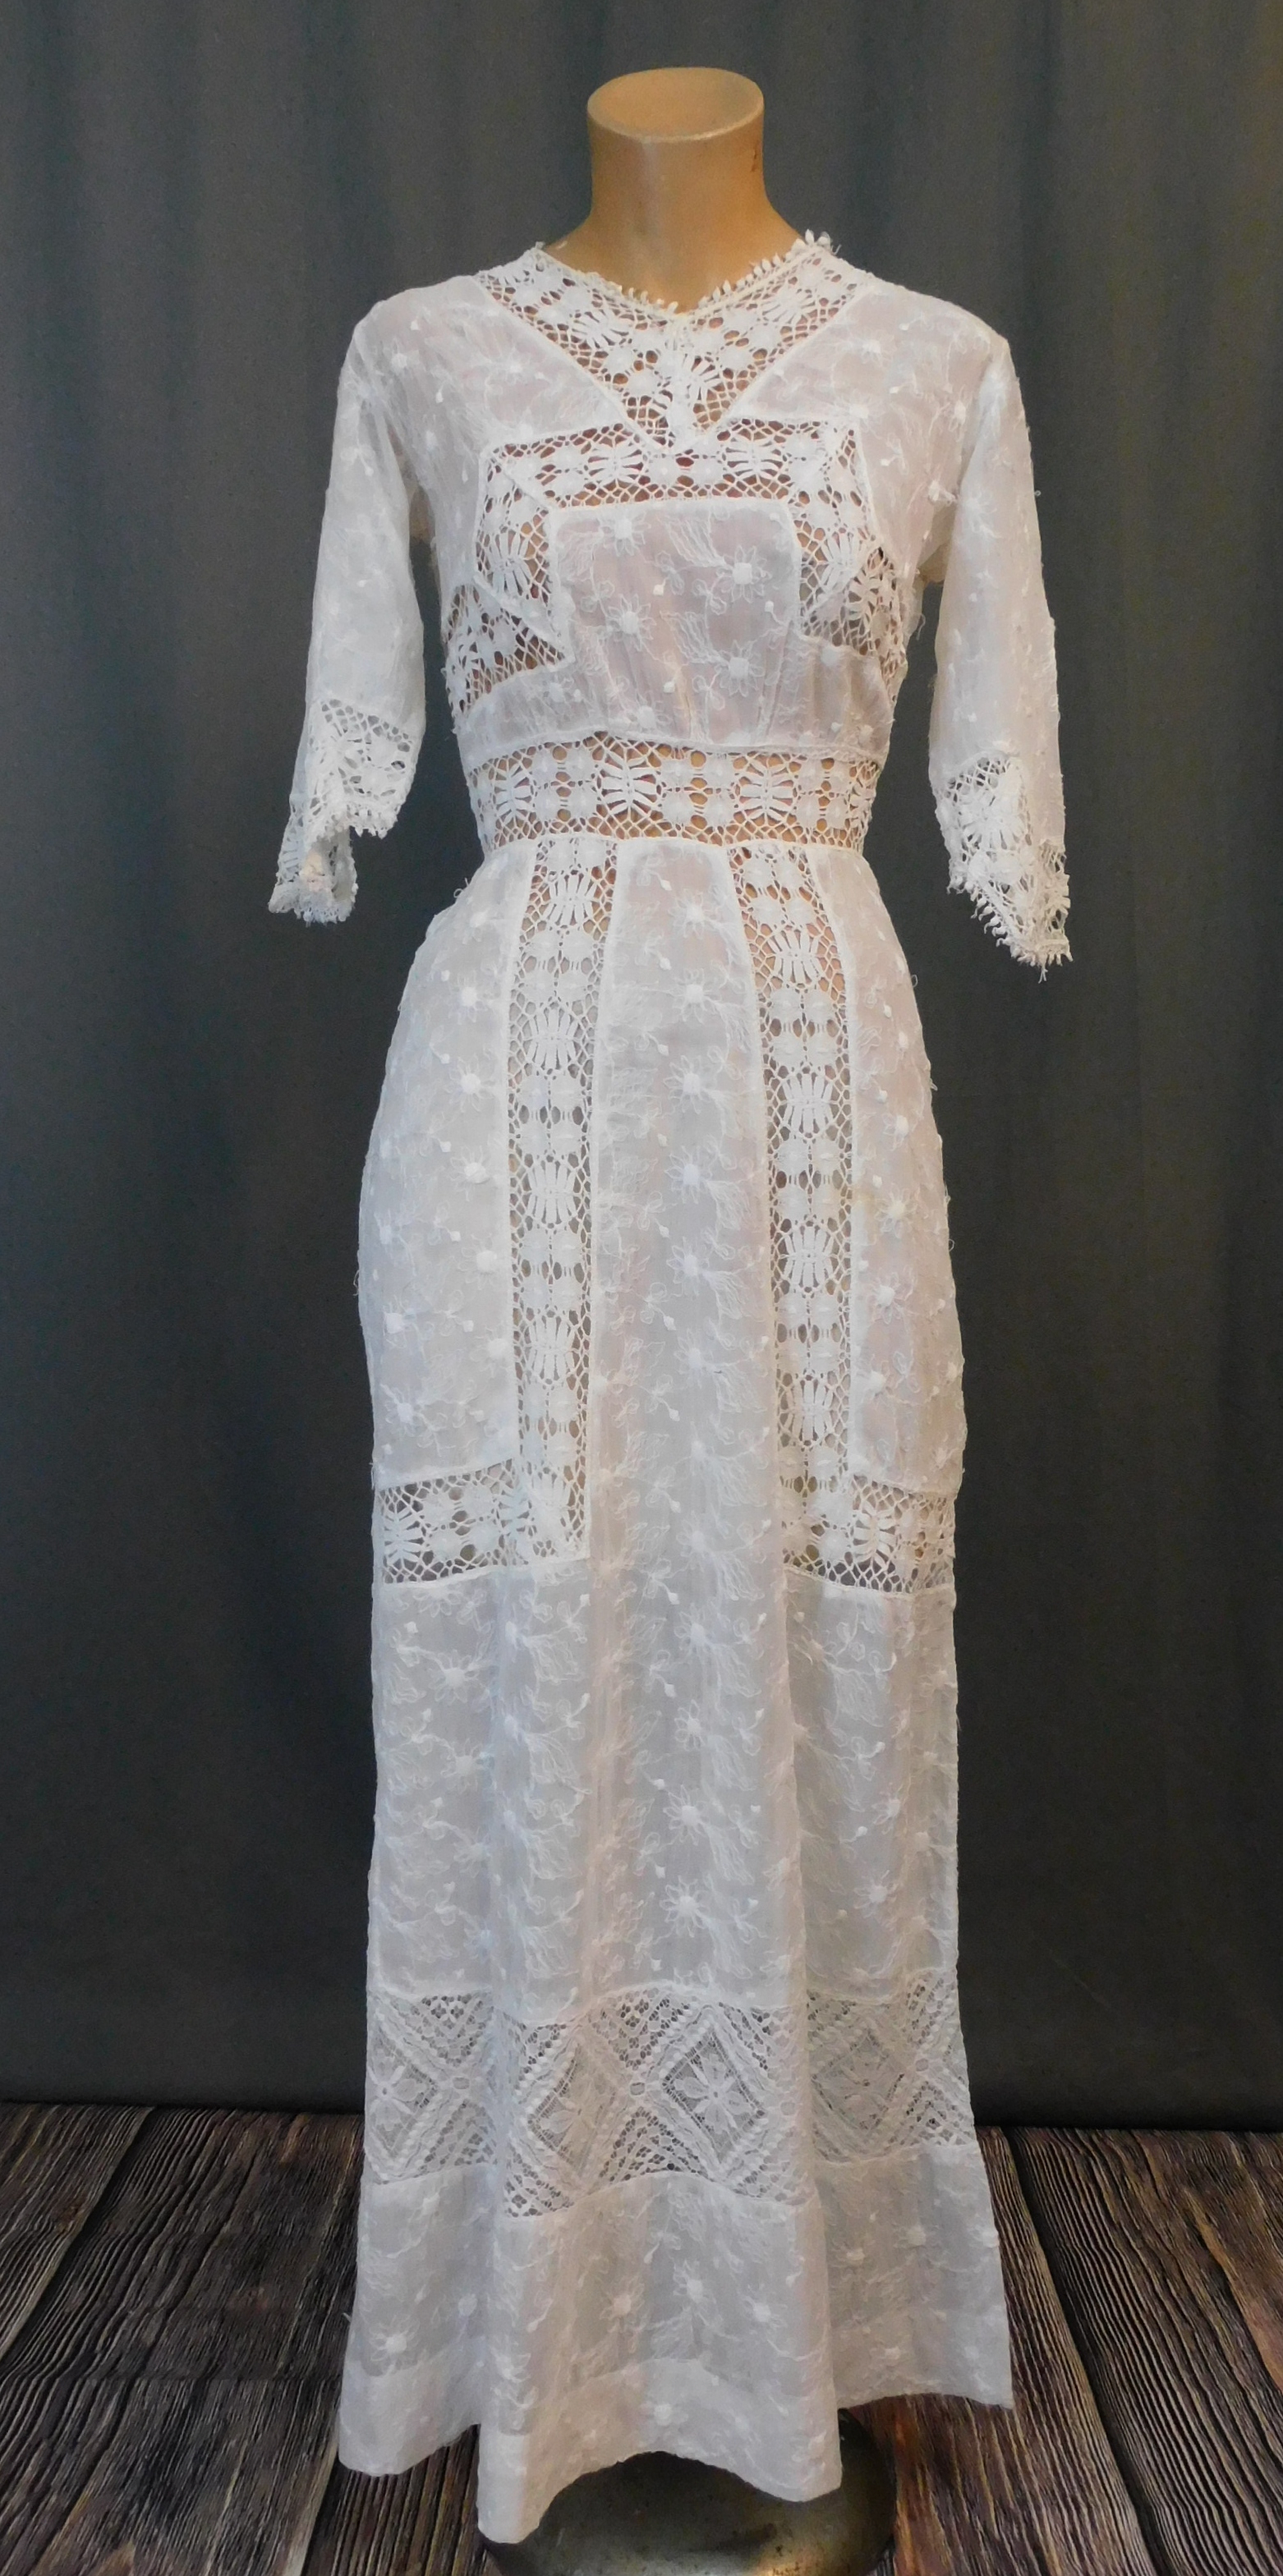 Antique Embroidered Cotton & Lace Dress, Vintage 1900s, XS 30 inch bust, some issues